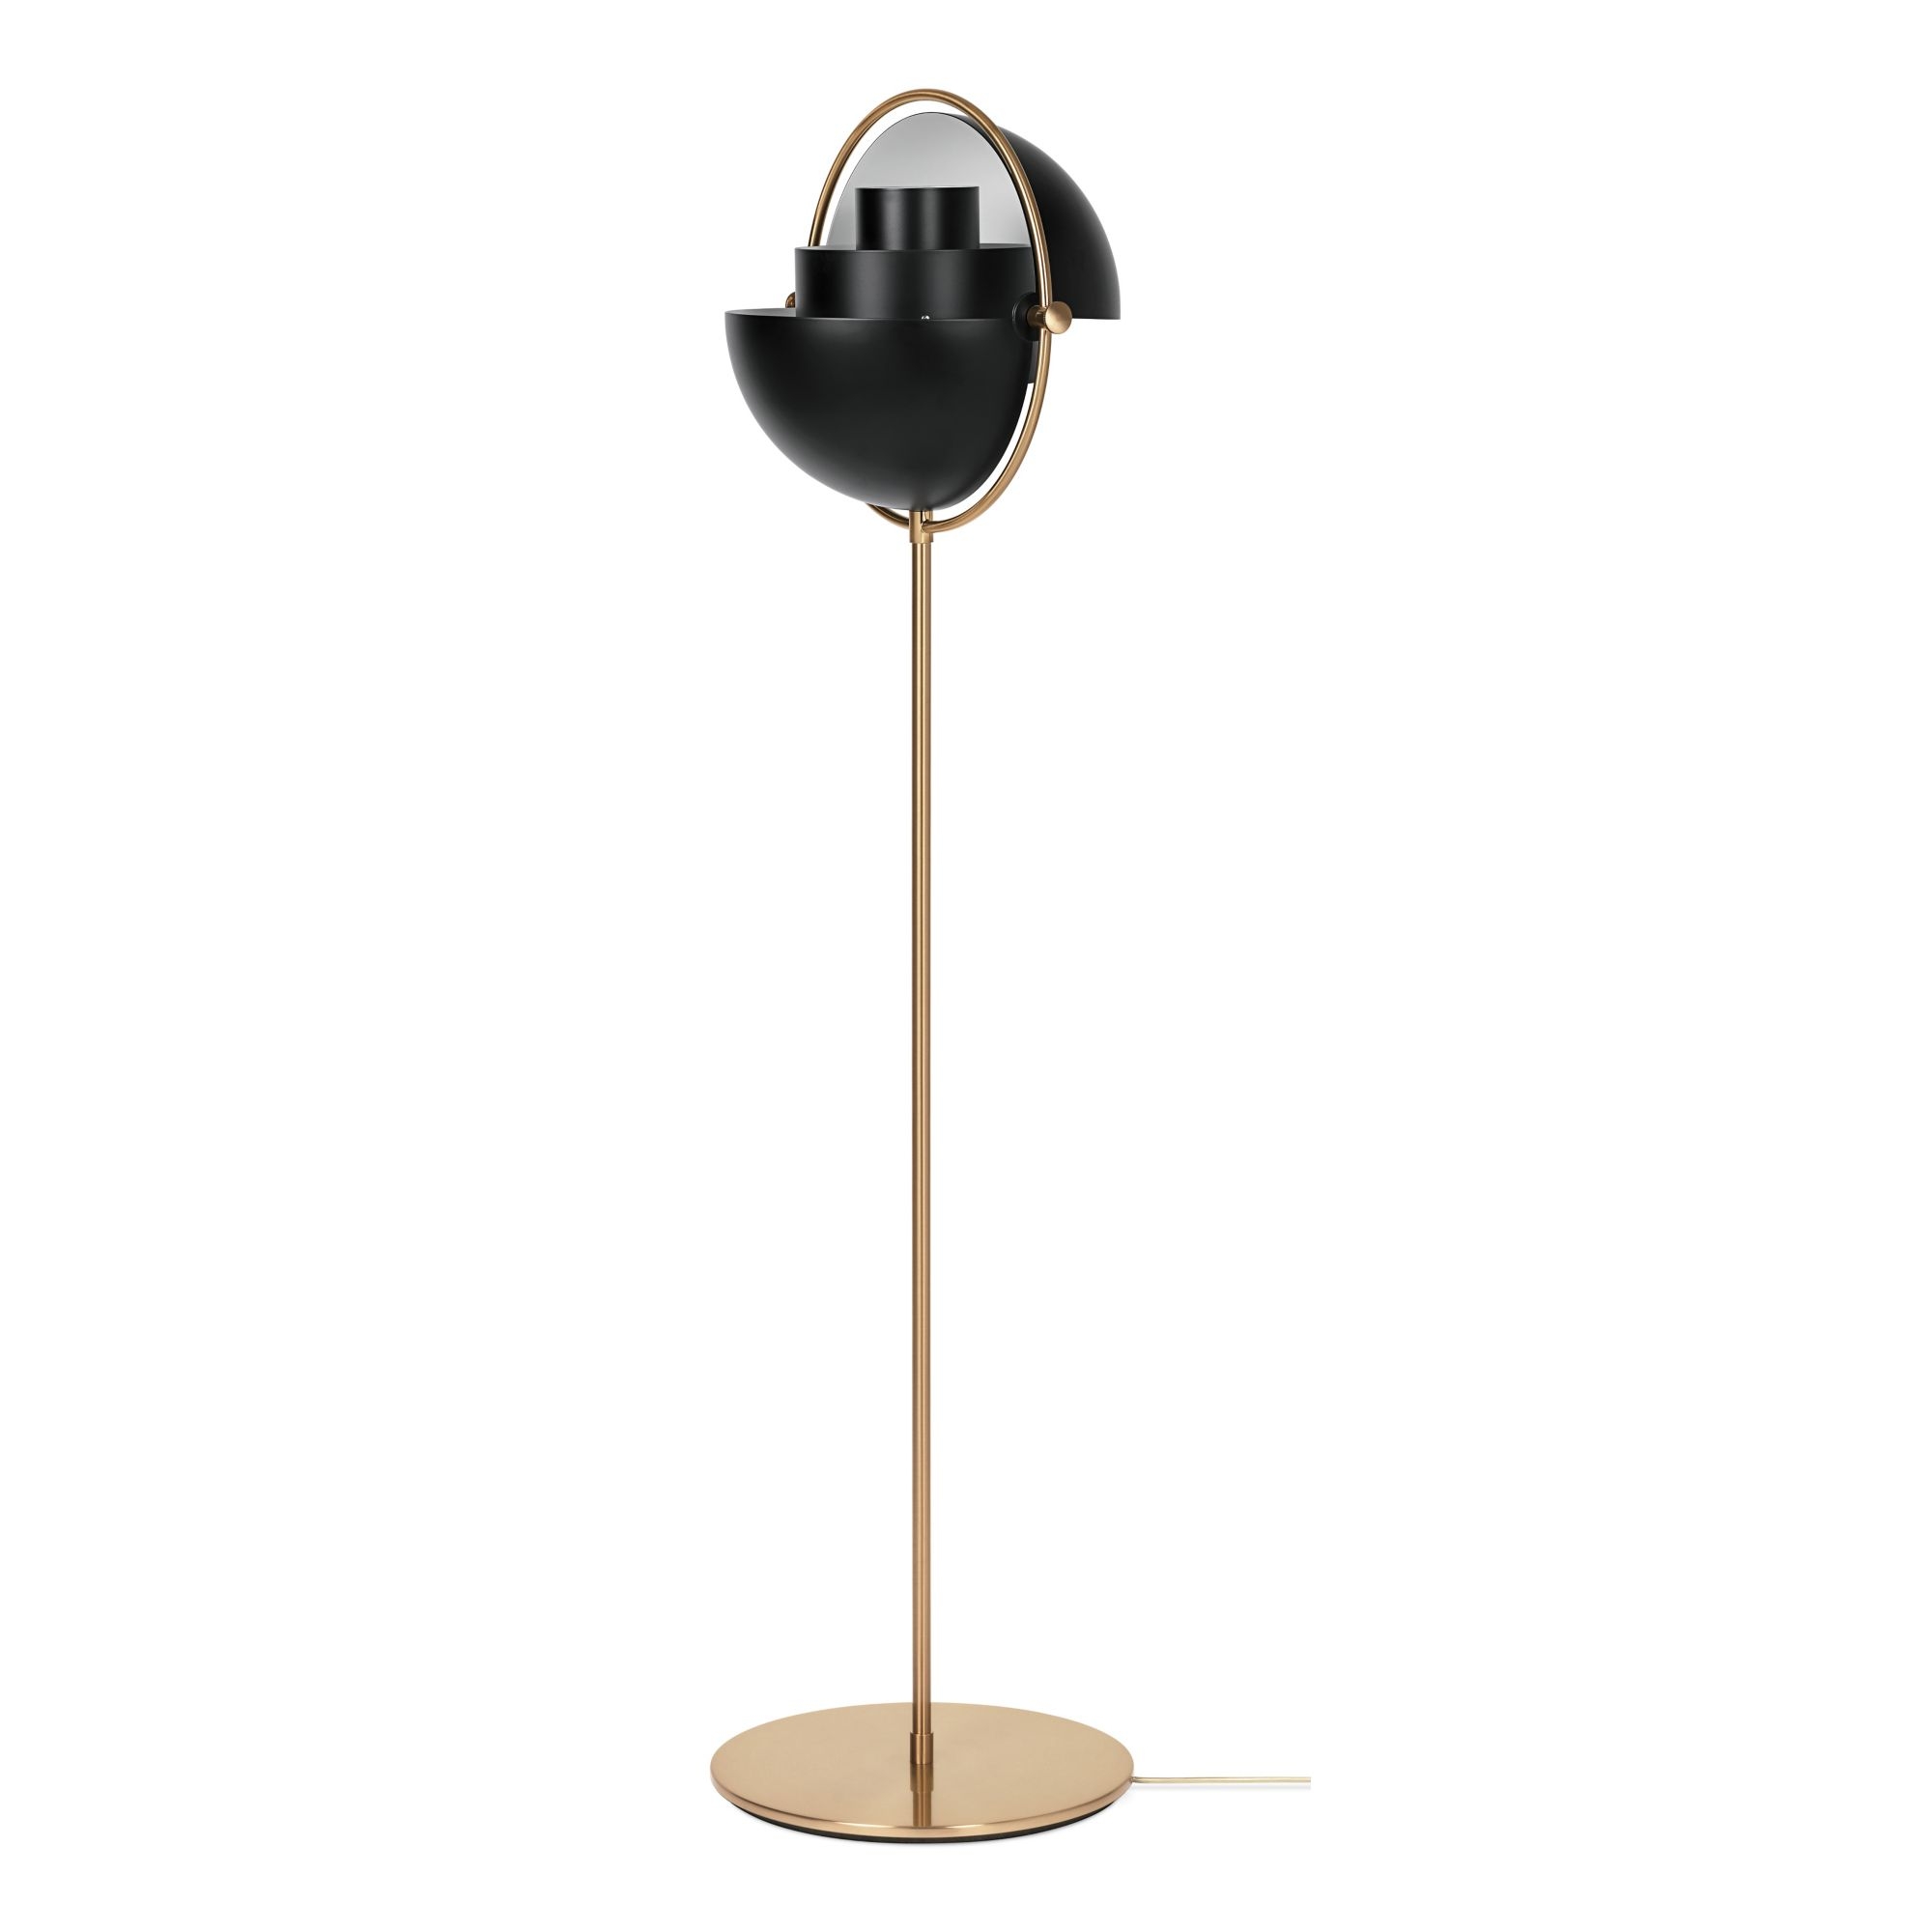 Multi-Lite Floor Lamp Designed by Louis Weisdorf, produced by Gubi - Image 0